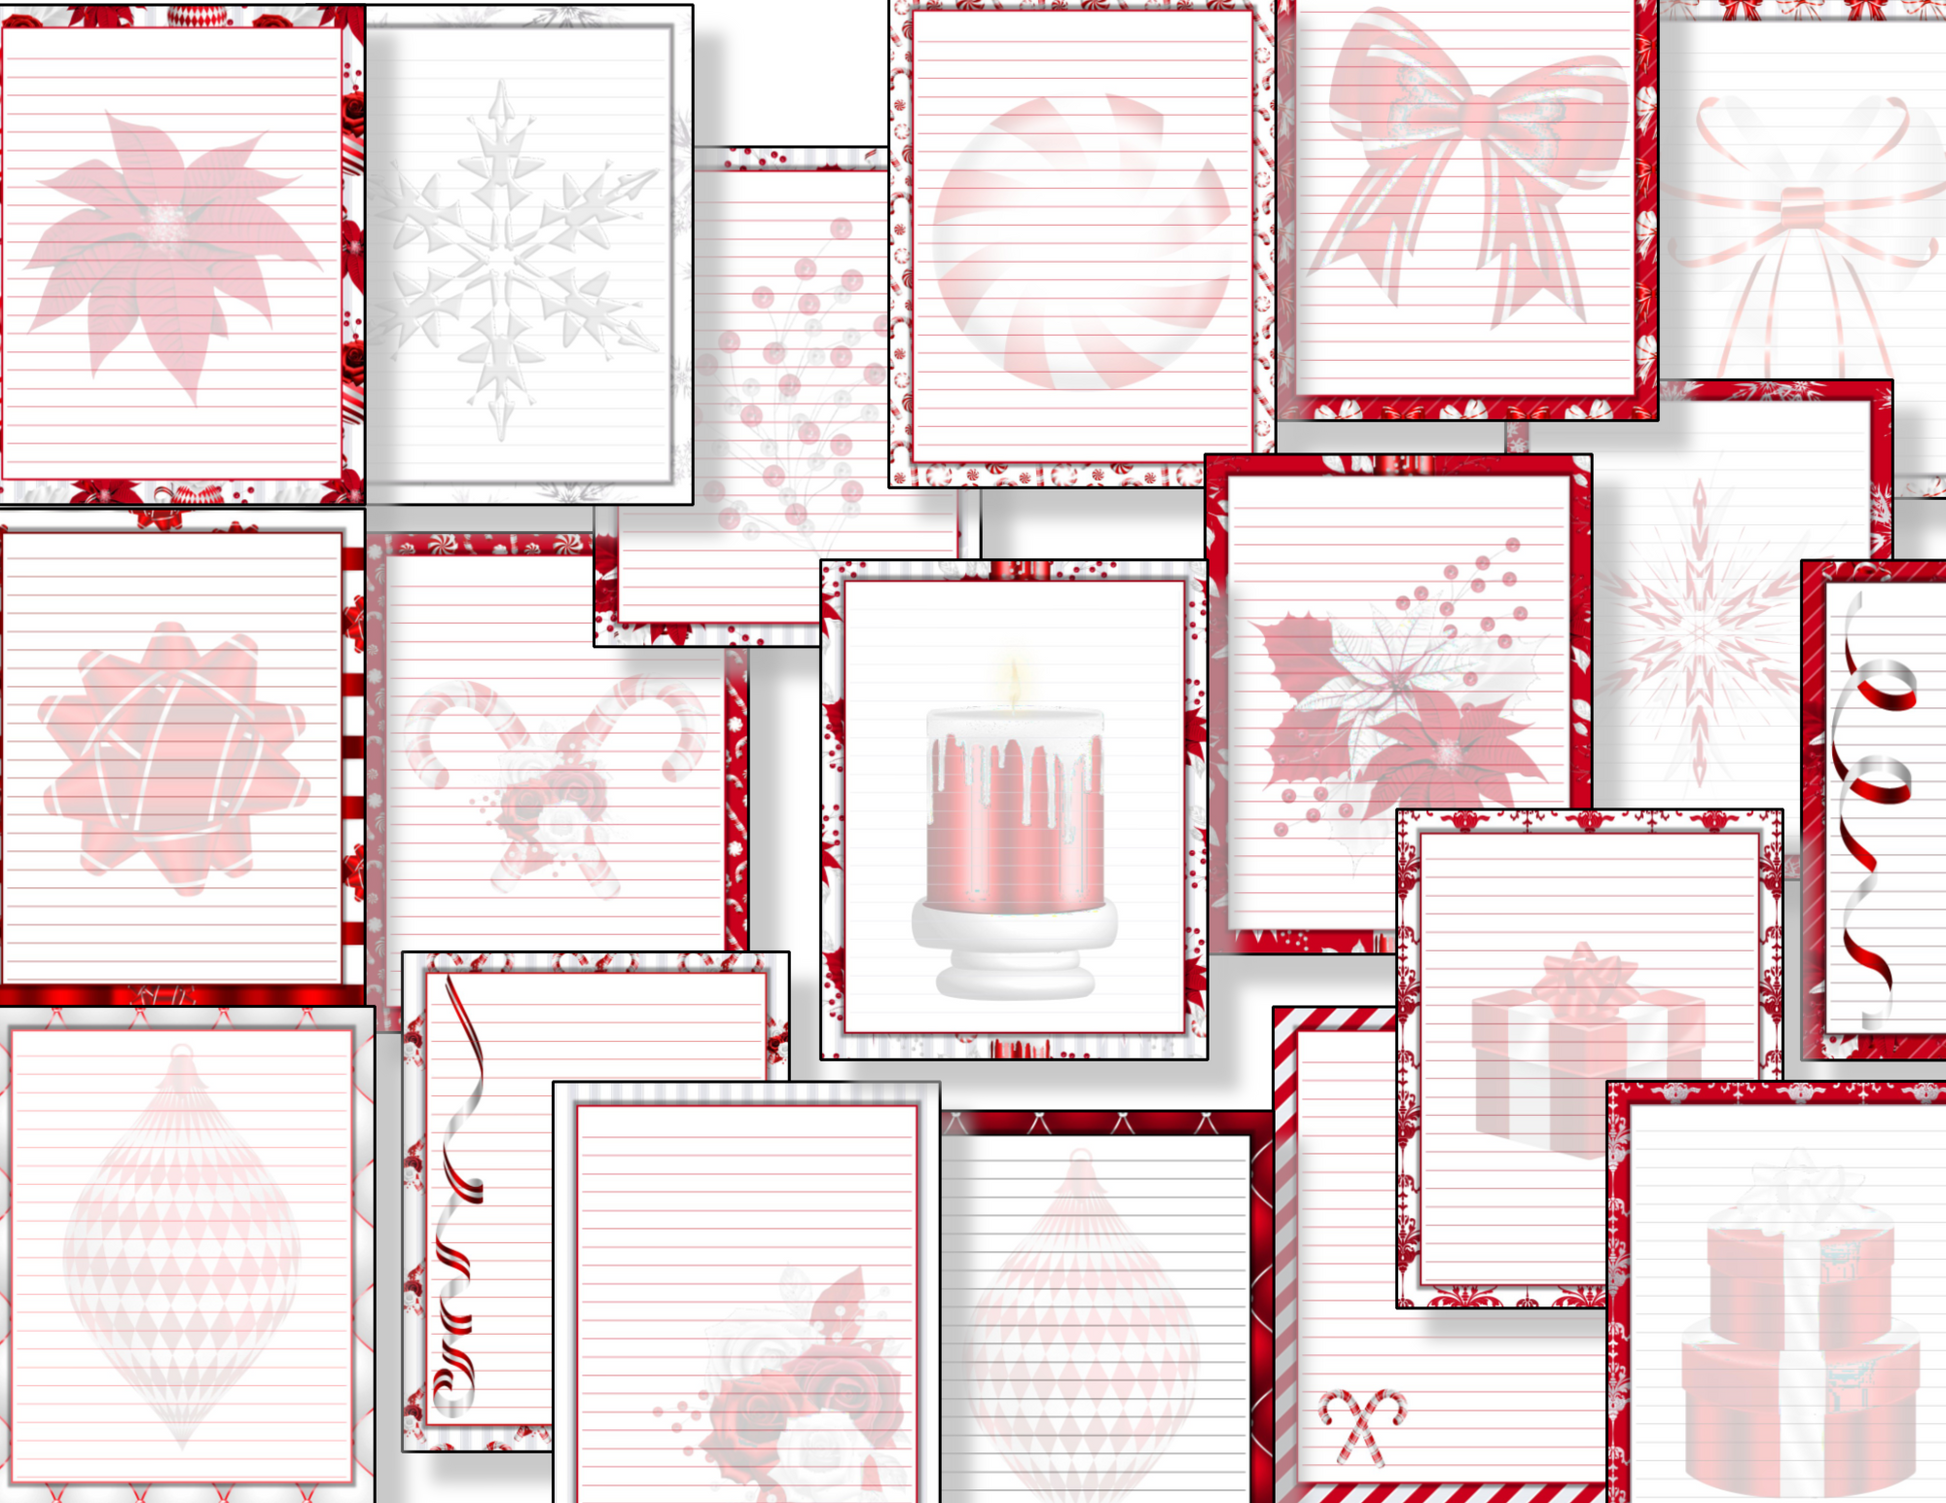 A collection of Organized 31 Shop Christmas Stationery with red and white decorations.